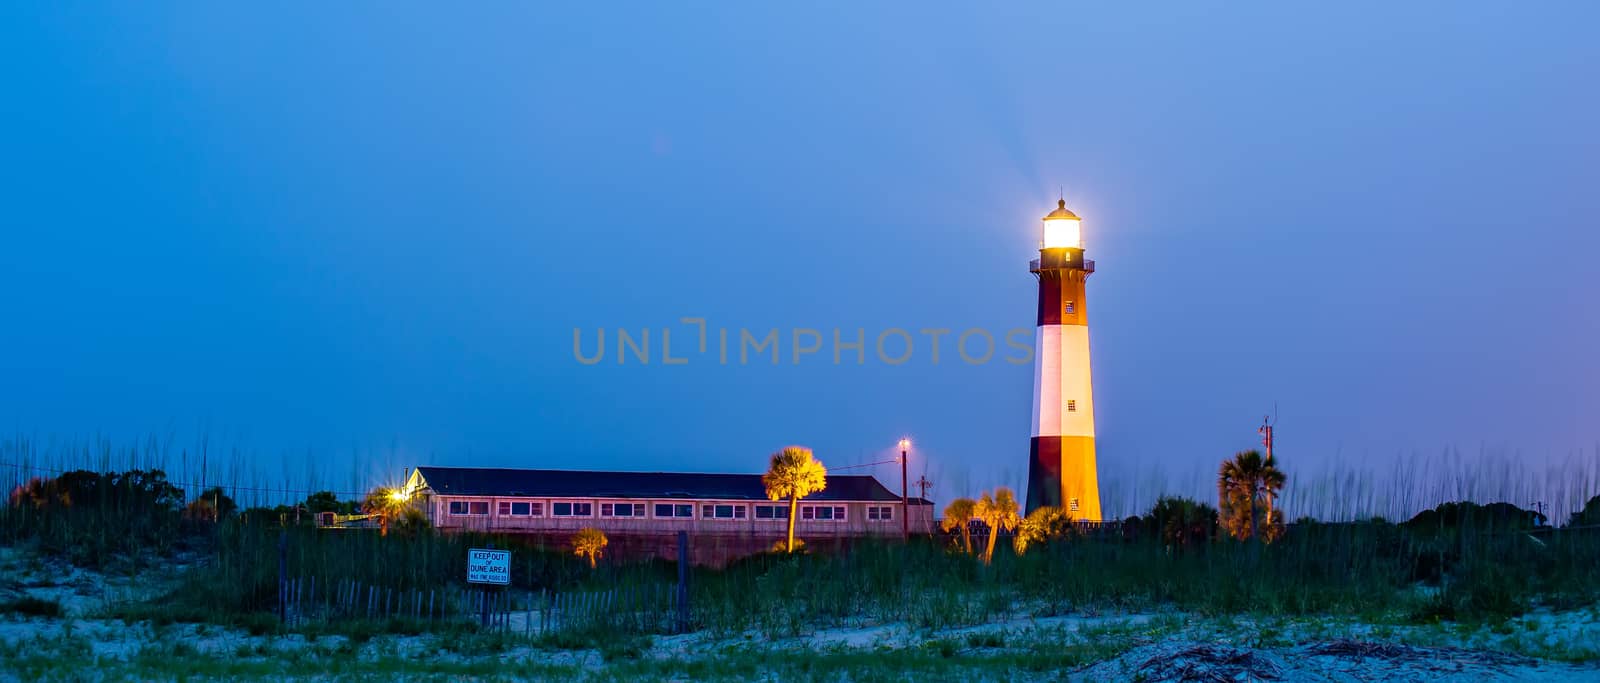 Tybee Island Light with storm approaching